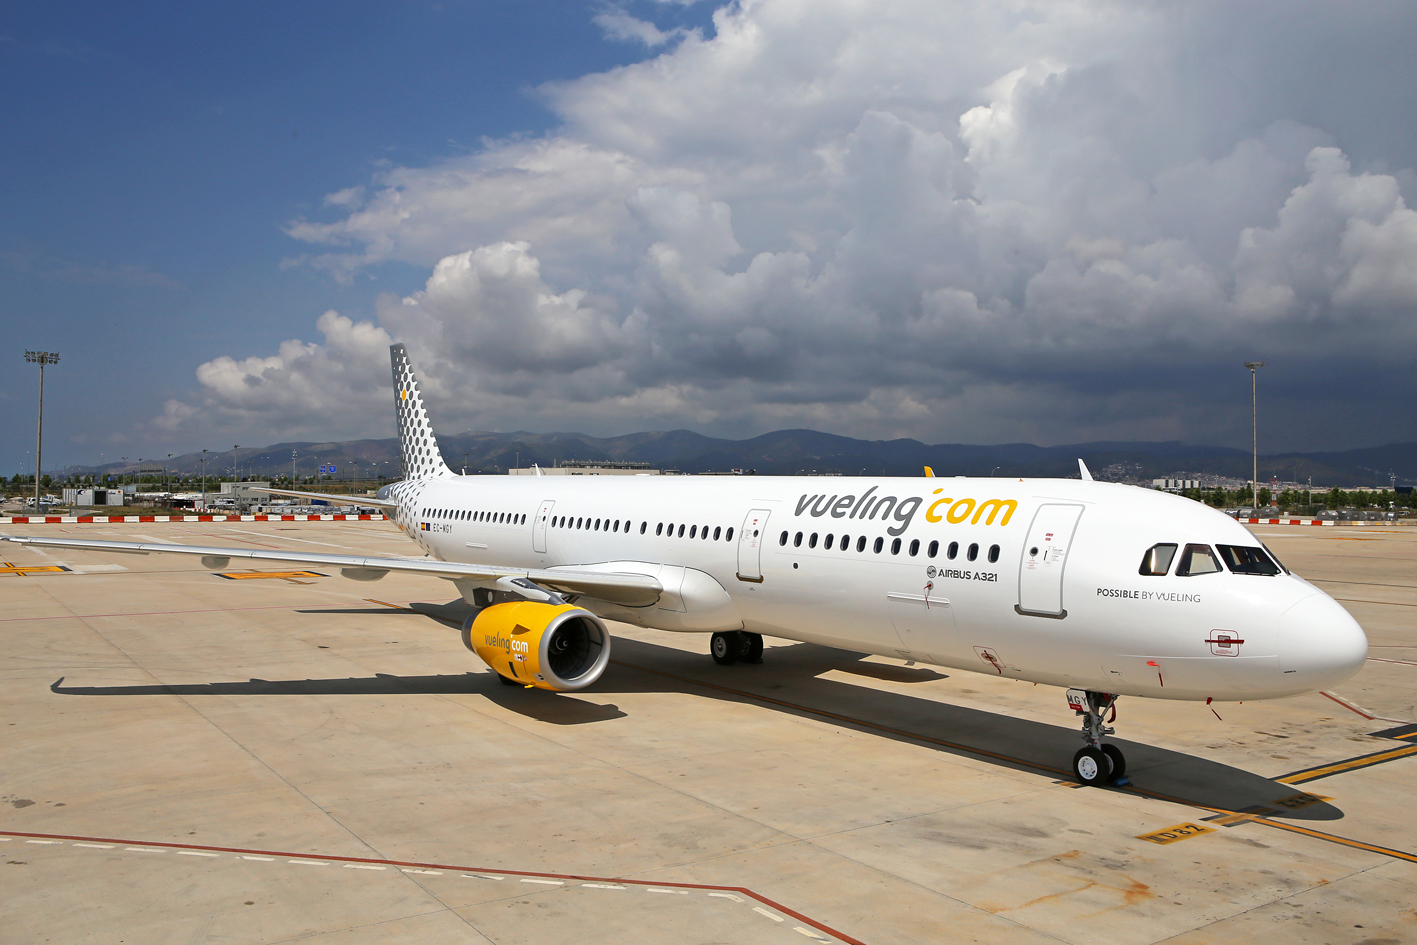 Vueling selects Ultramain Systems’ ELB software